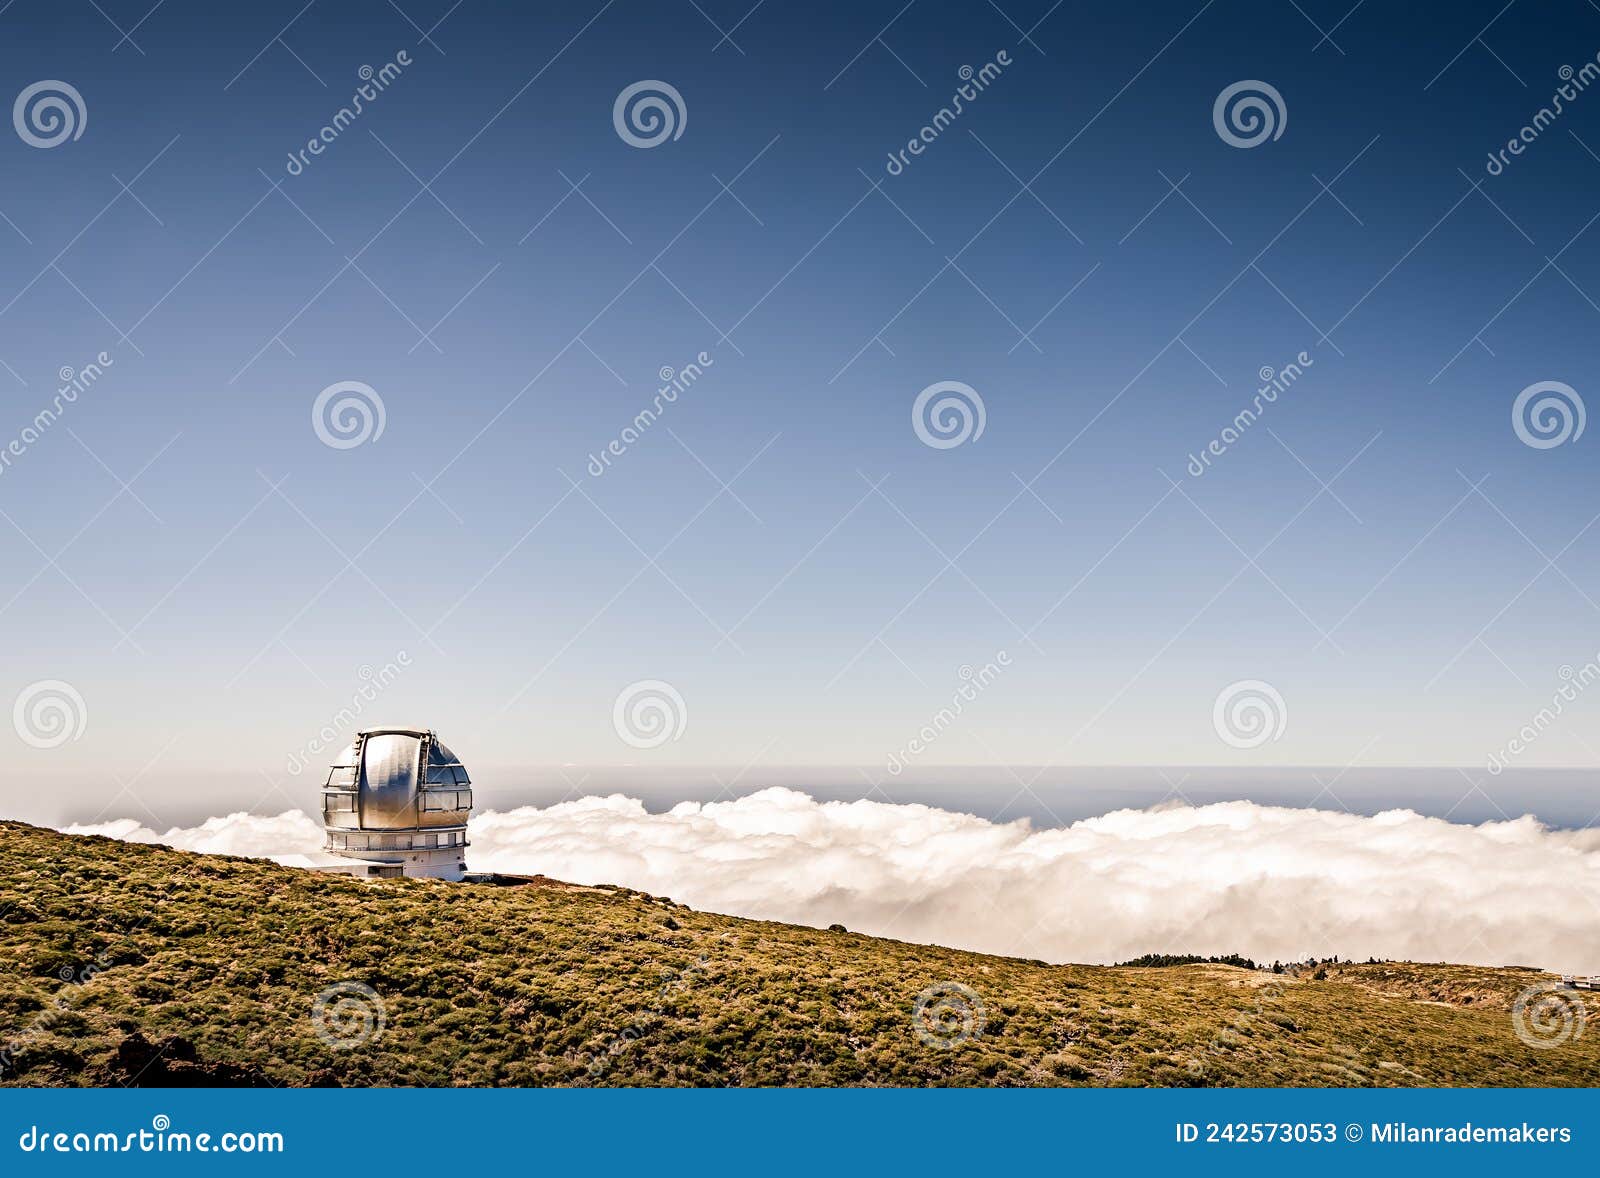 astronomy observatory on a mountain above the clouds with blue sky. gran telescopio canarias. telescope dome with beautiful